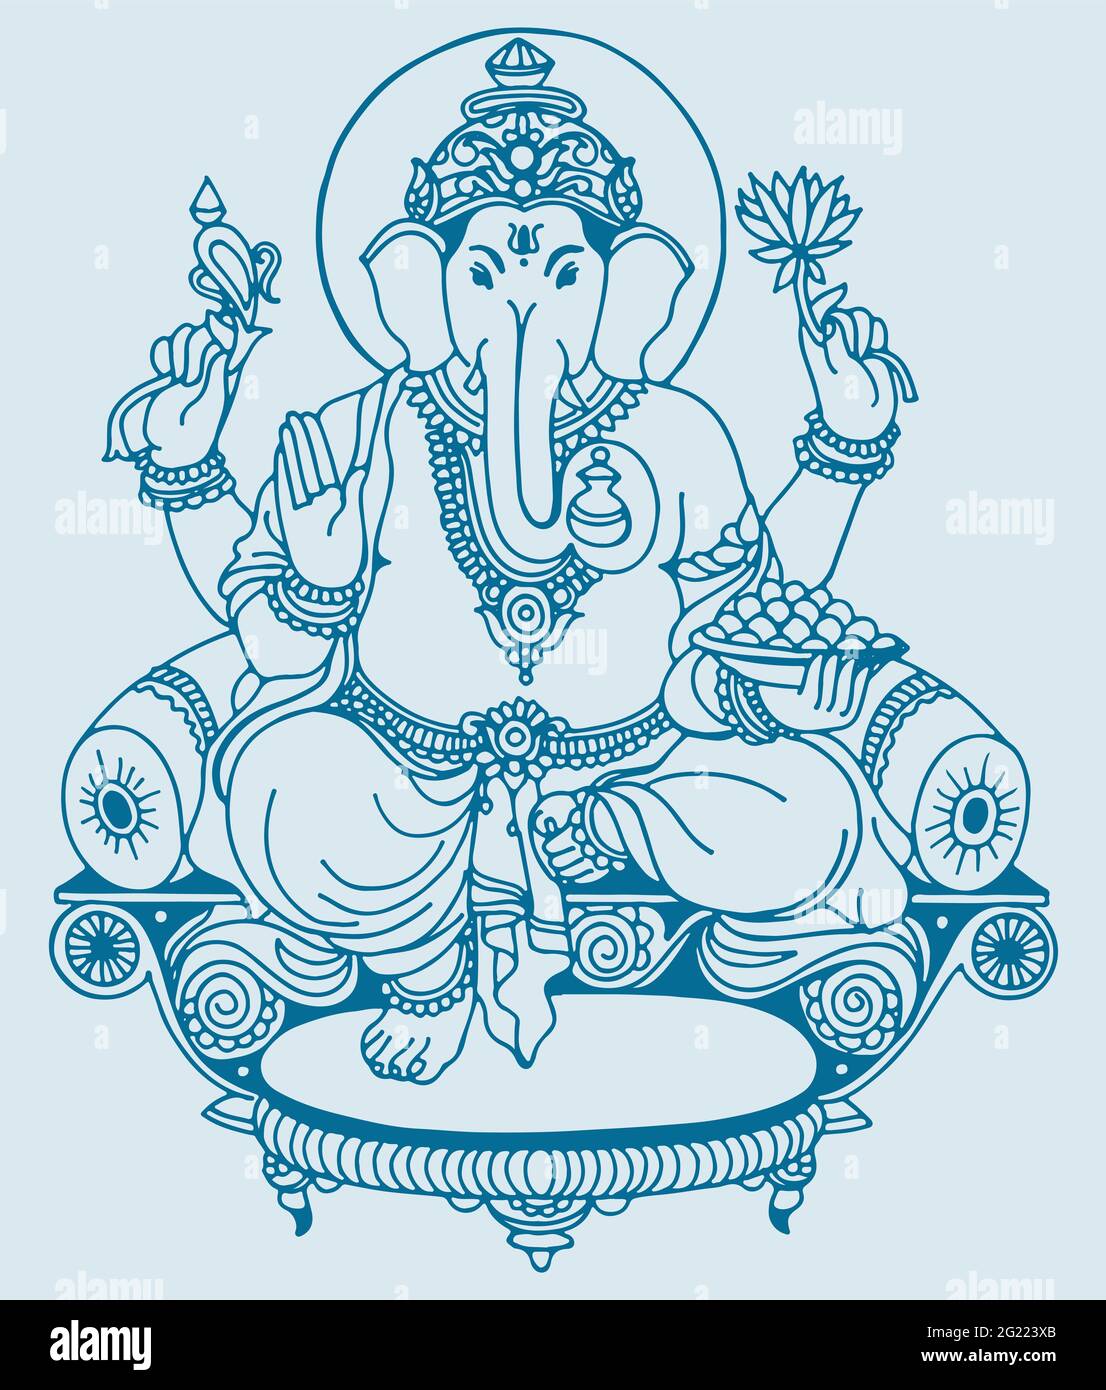 Drawing or sketch of Lord Ganesha isolated on a light-blue ...